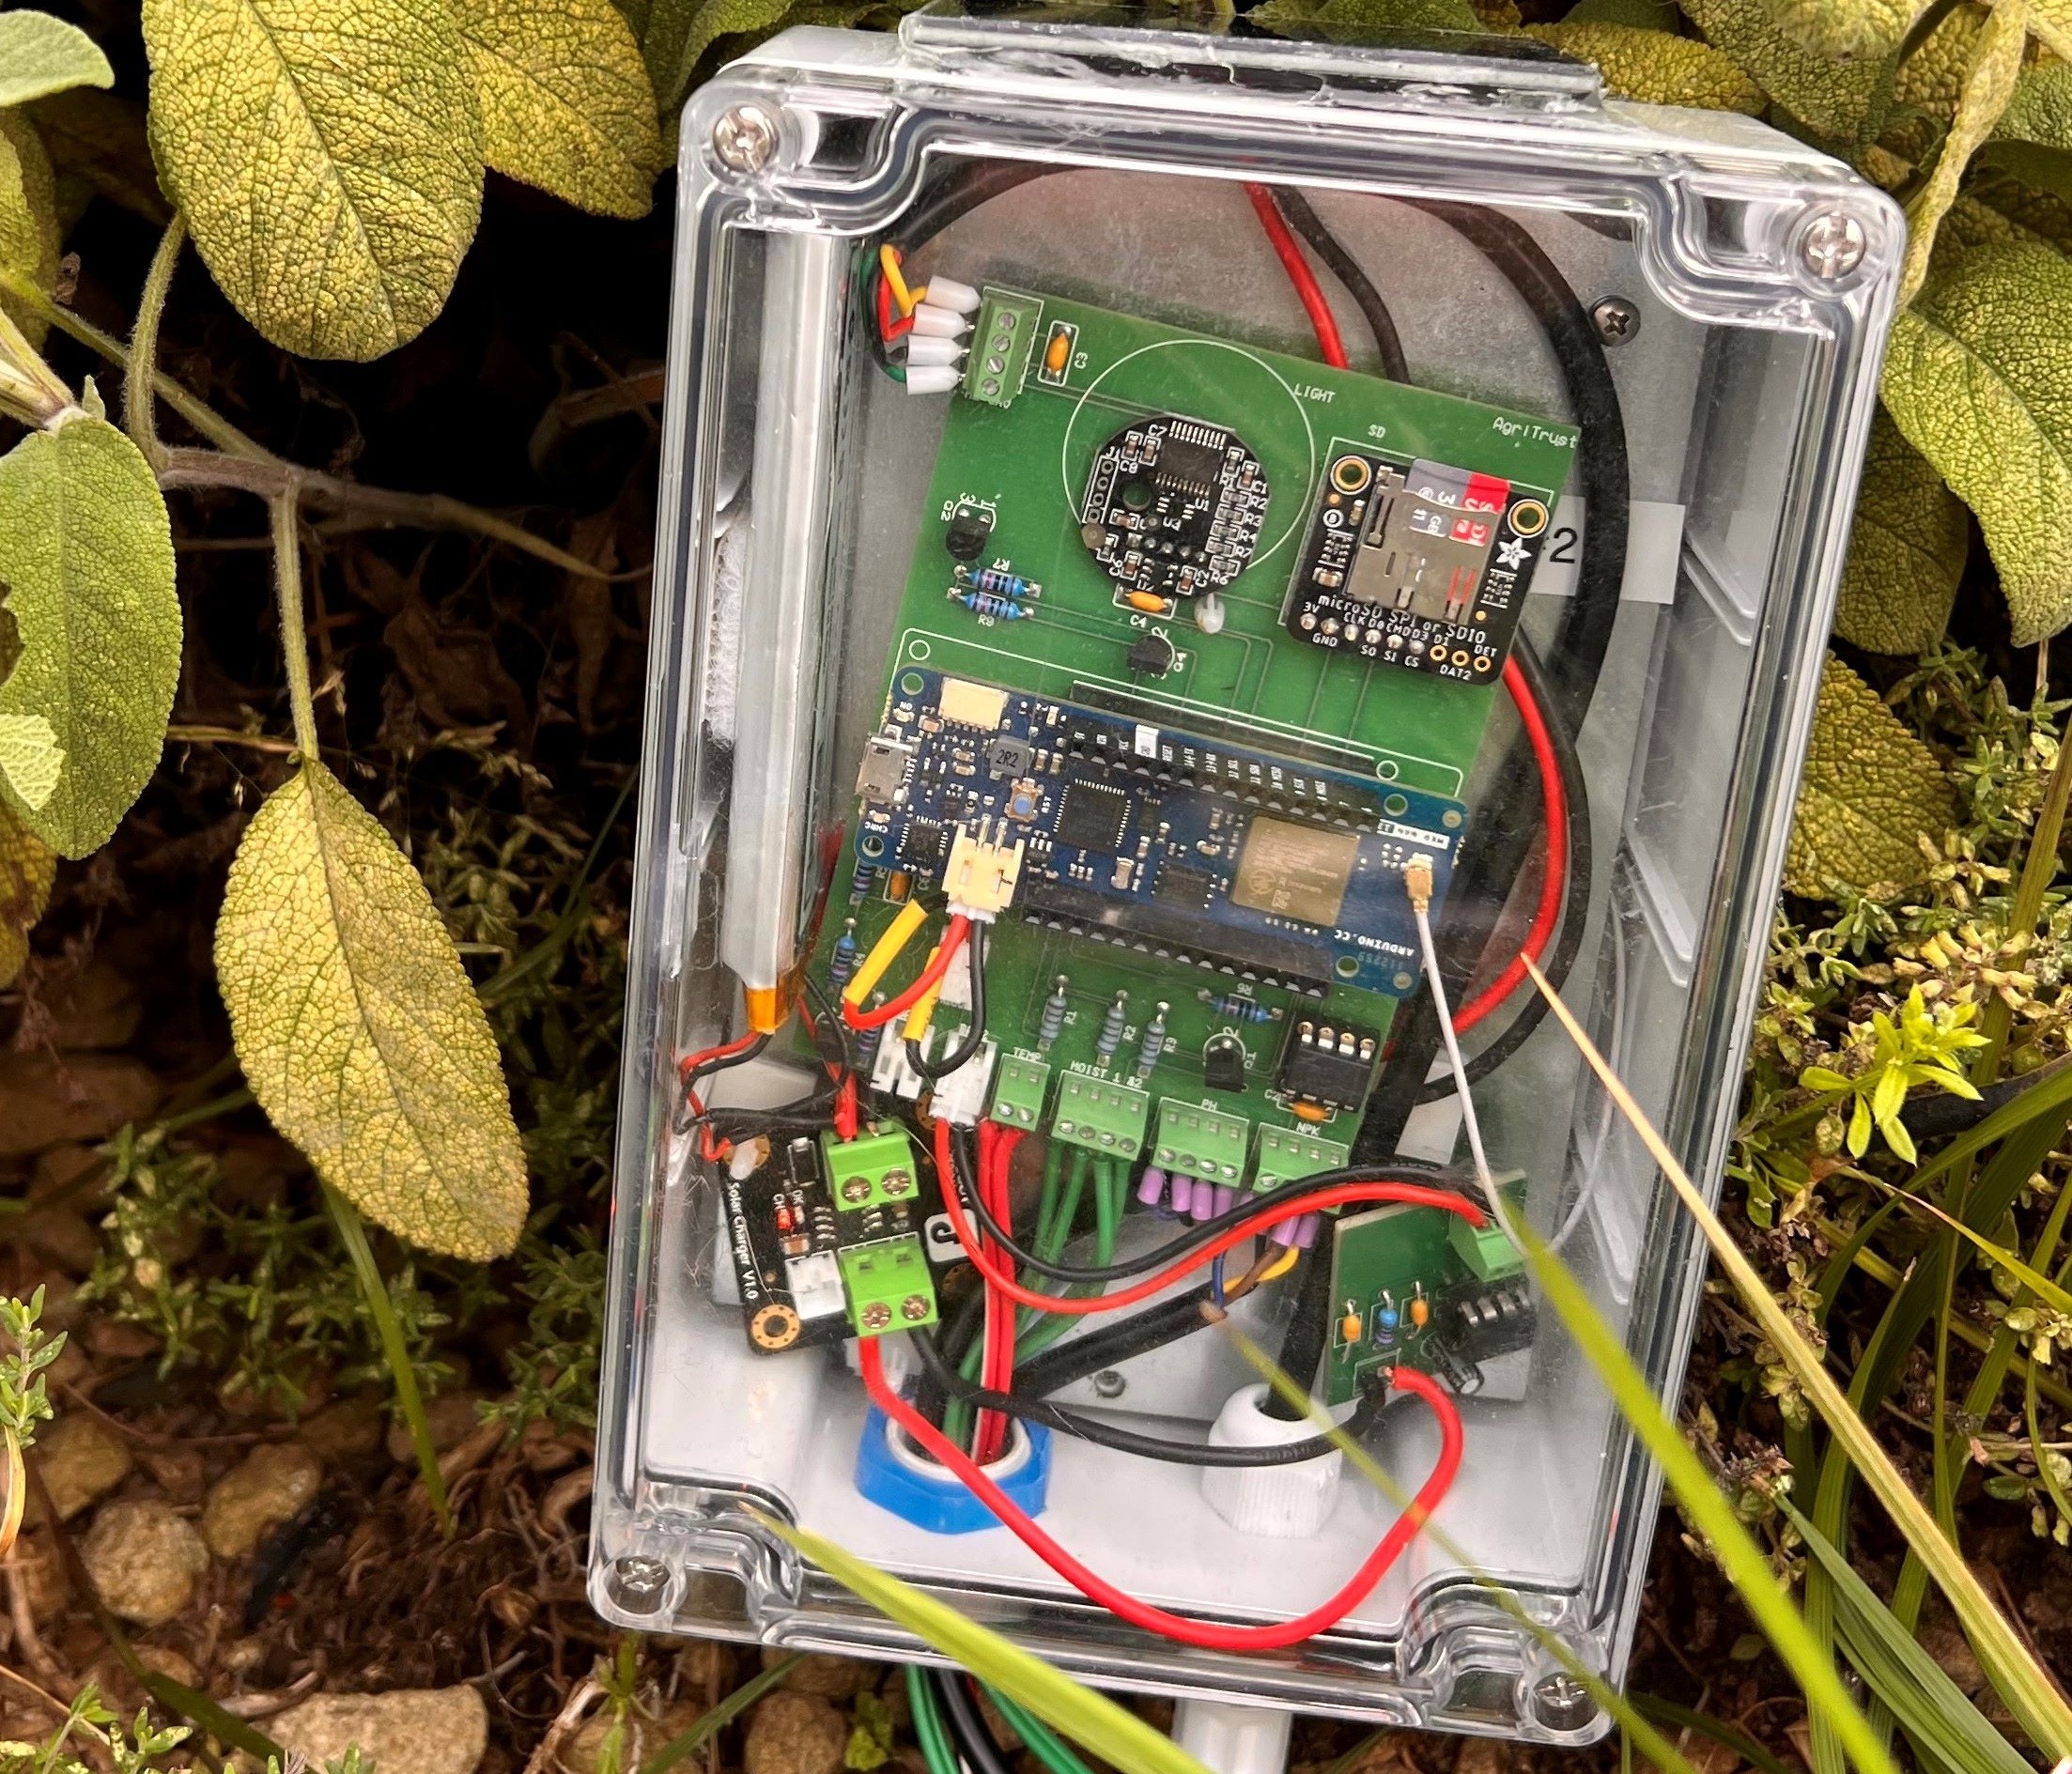 The Squirrel Box aims to bring confidence to smart farming